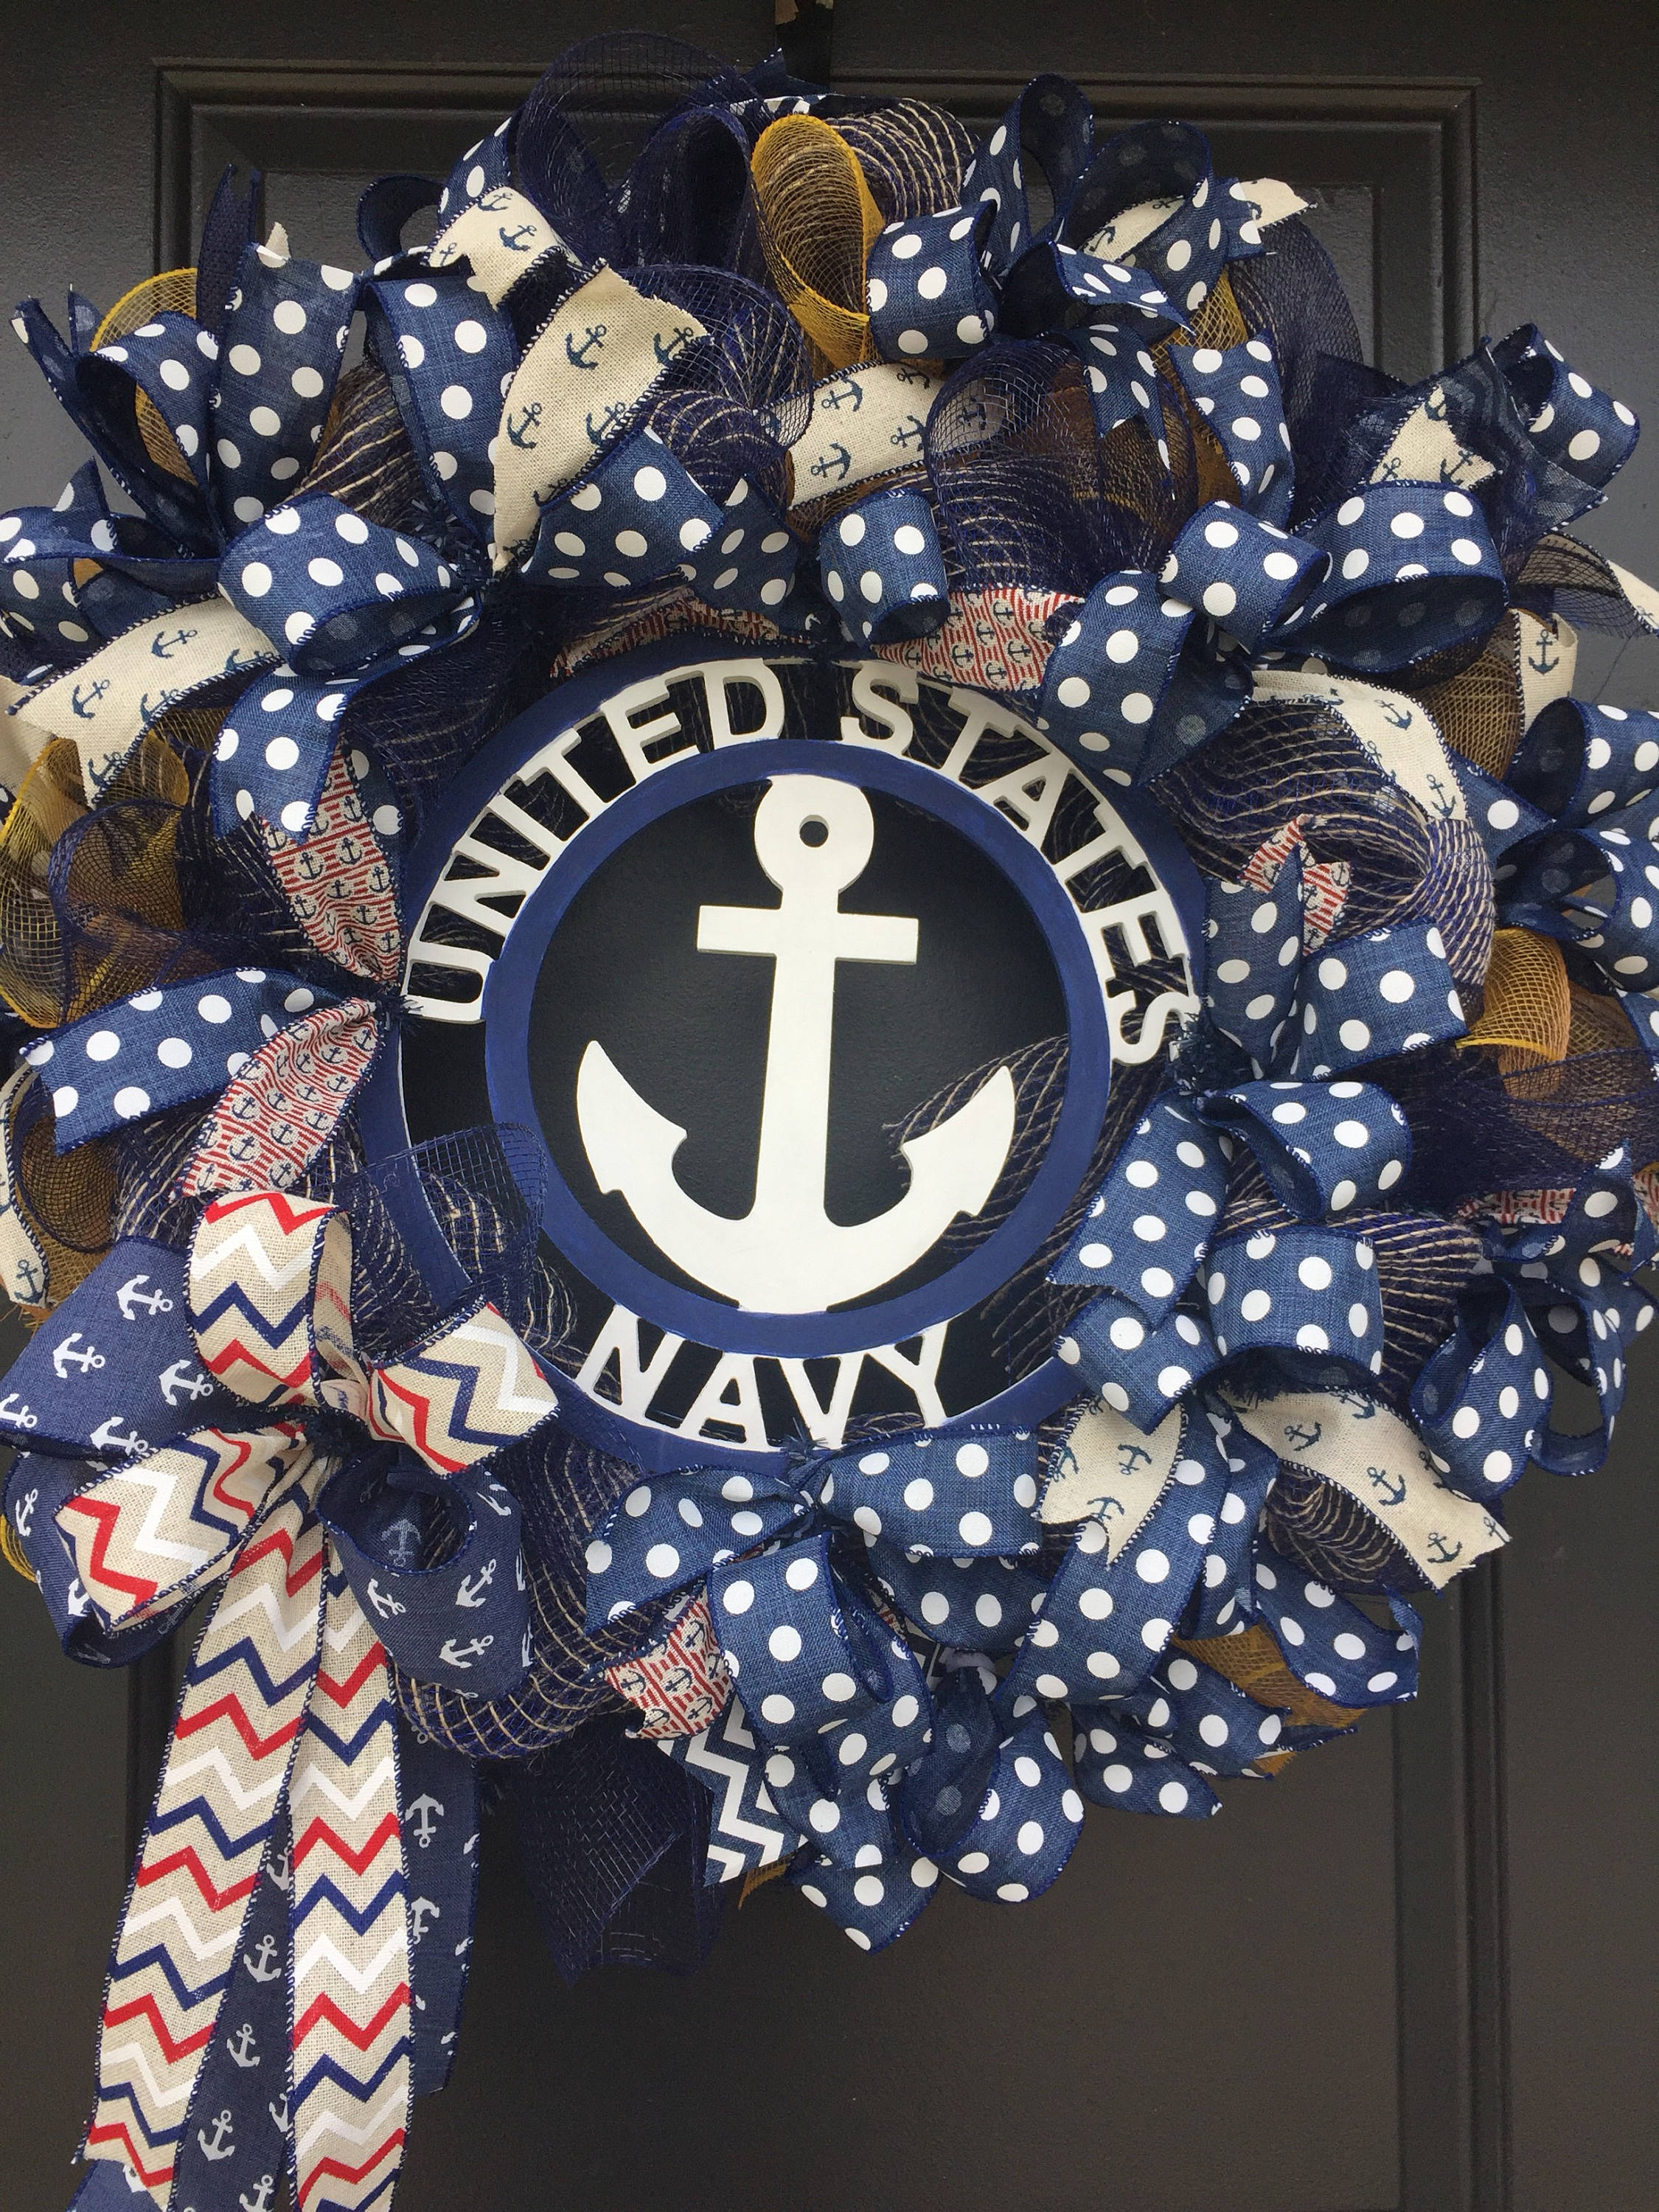 US Navy Wreath,Navy Gift, PatrioticWreath, Military Wreath,Naval Wreath How Much Does It Cost To Ship A Wreath